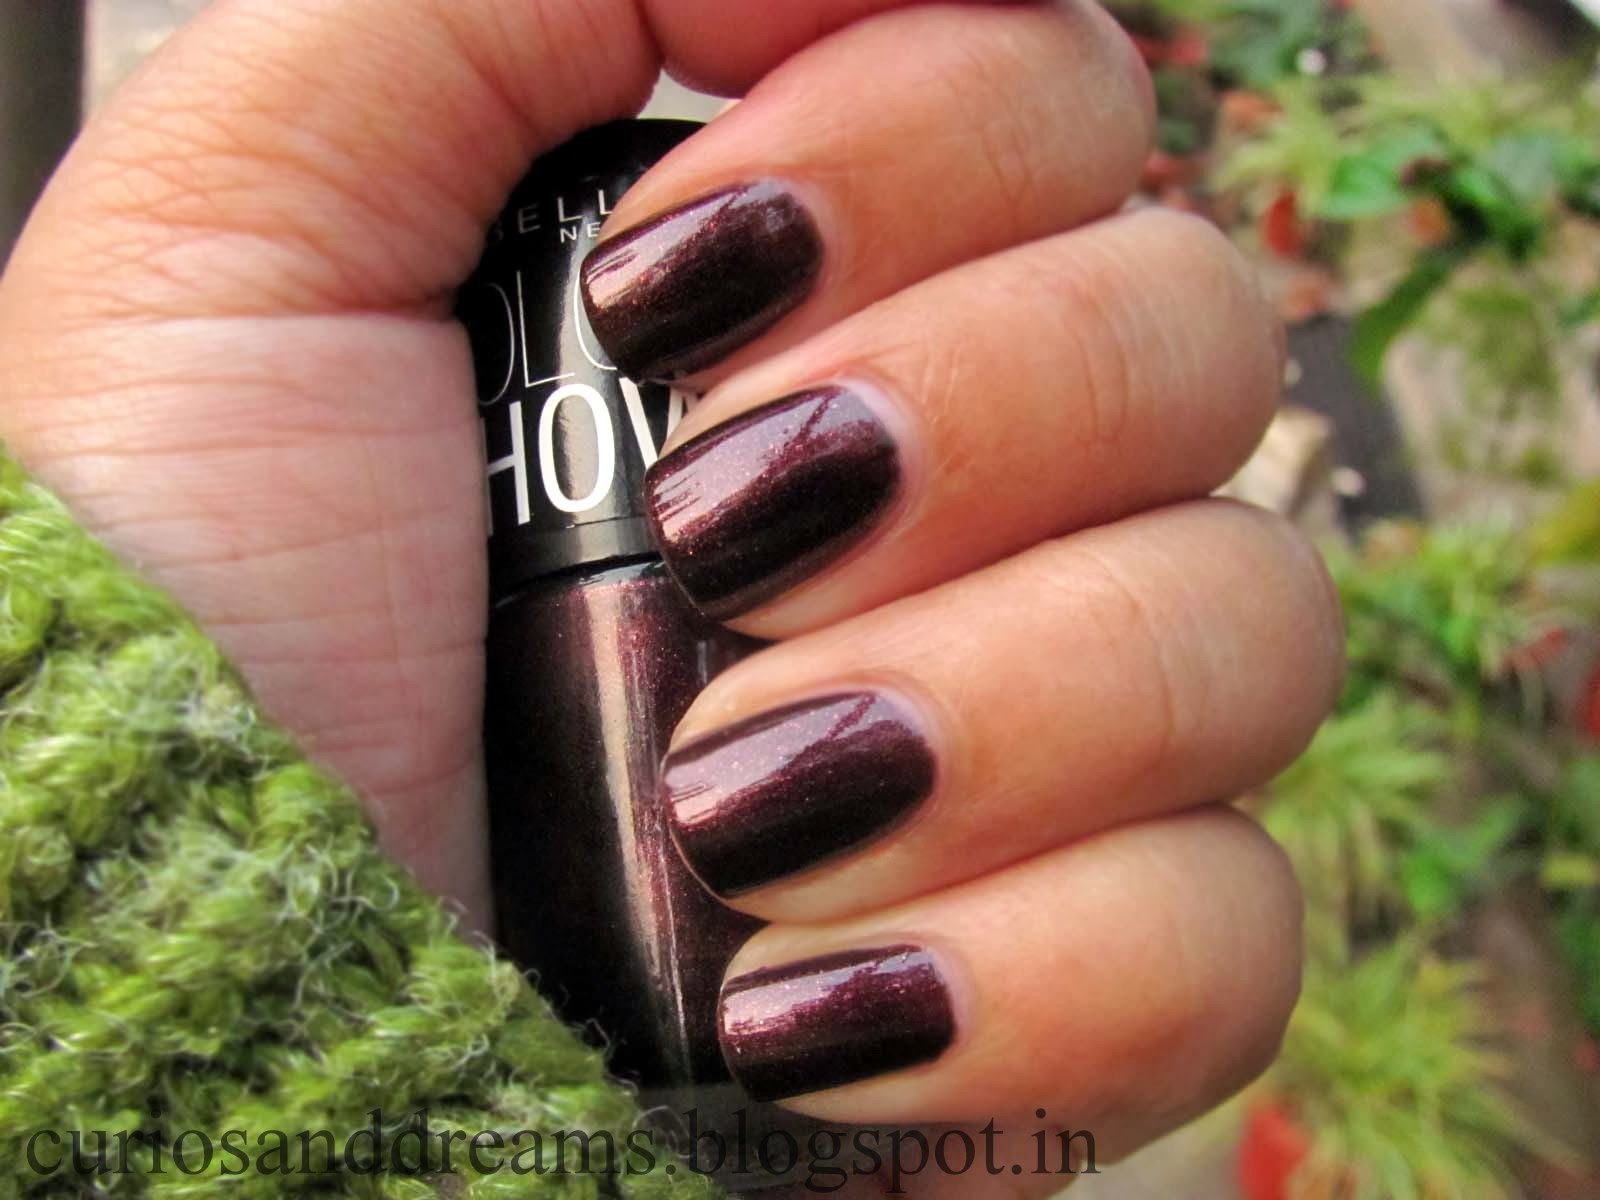 Maybelline Color Show Wine and Dine Review, Maybelline Color Show Wine and Dine NOTD, Maybelline Color Show Wine and Dine swatch